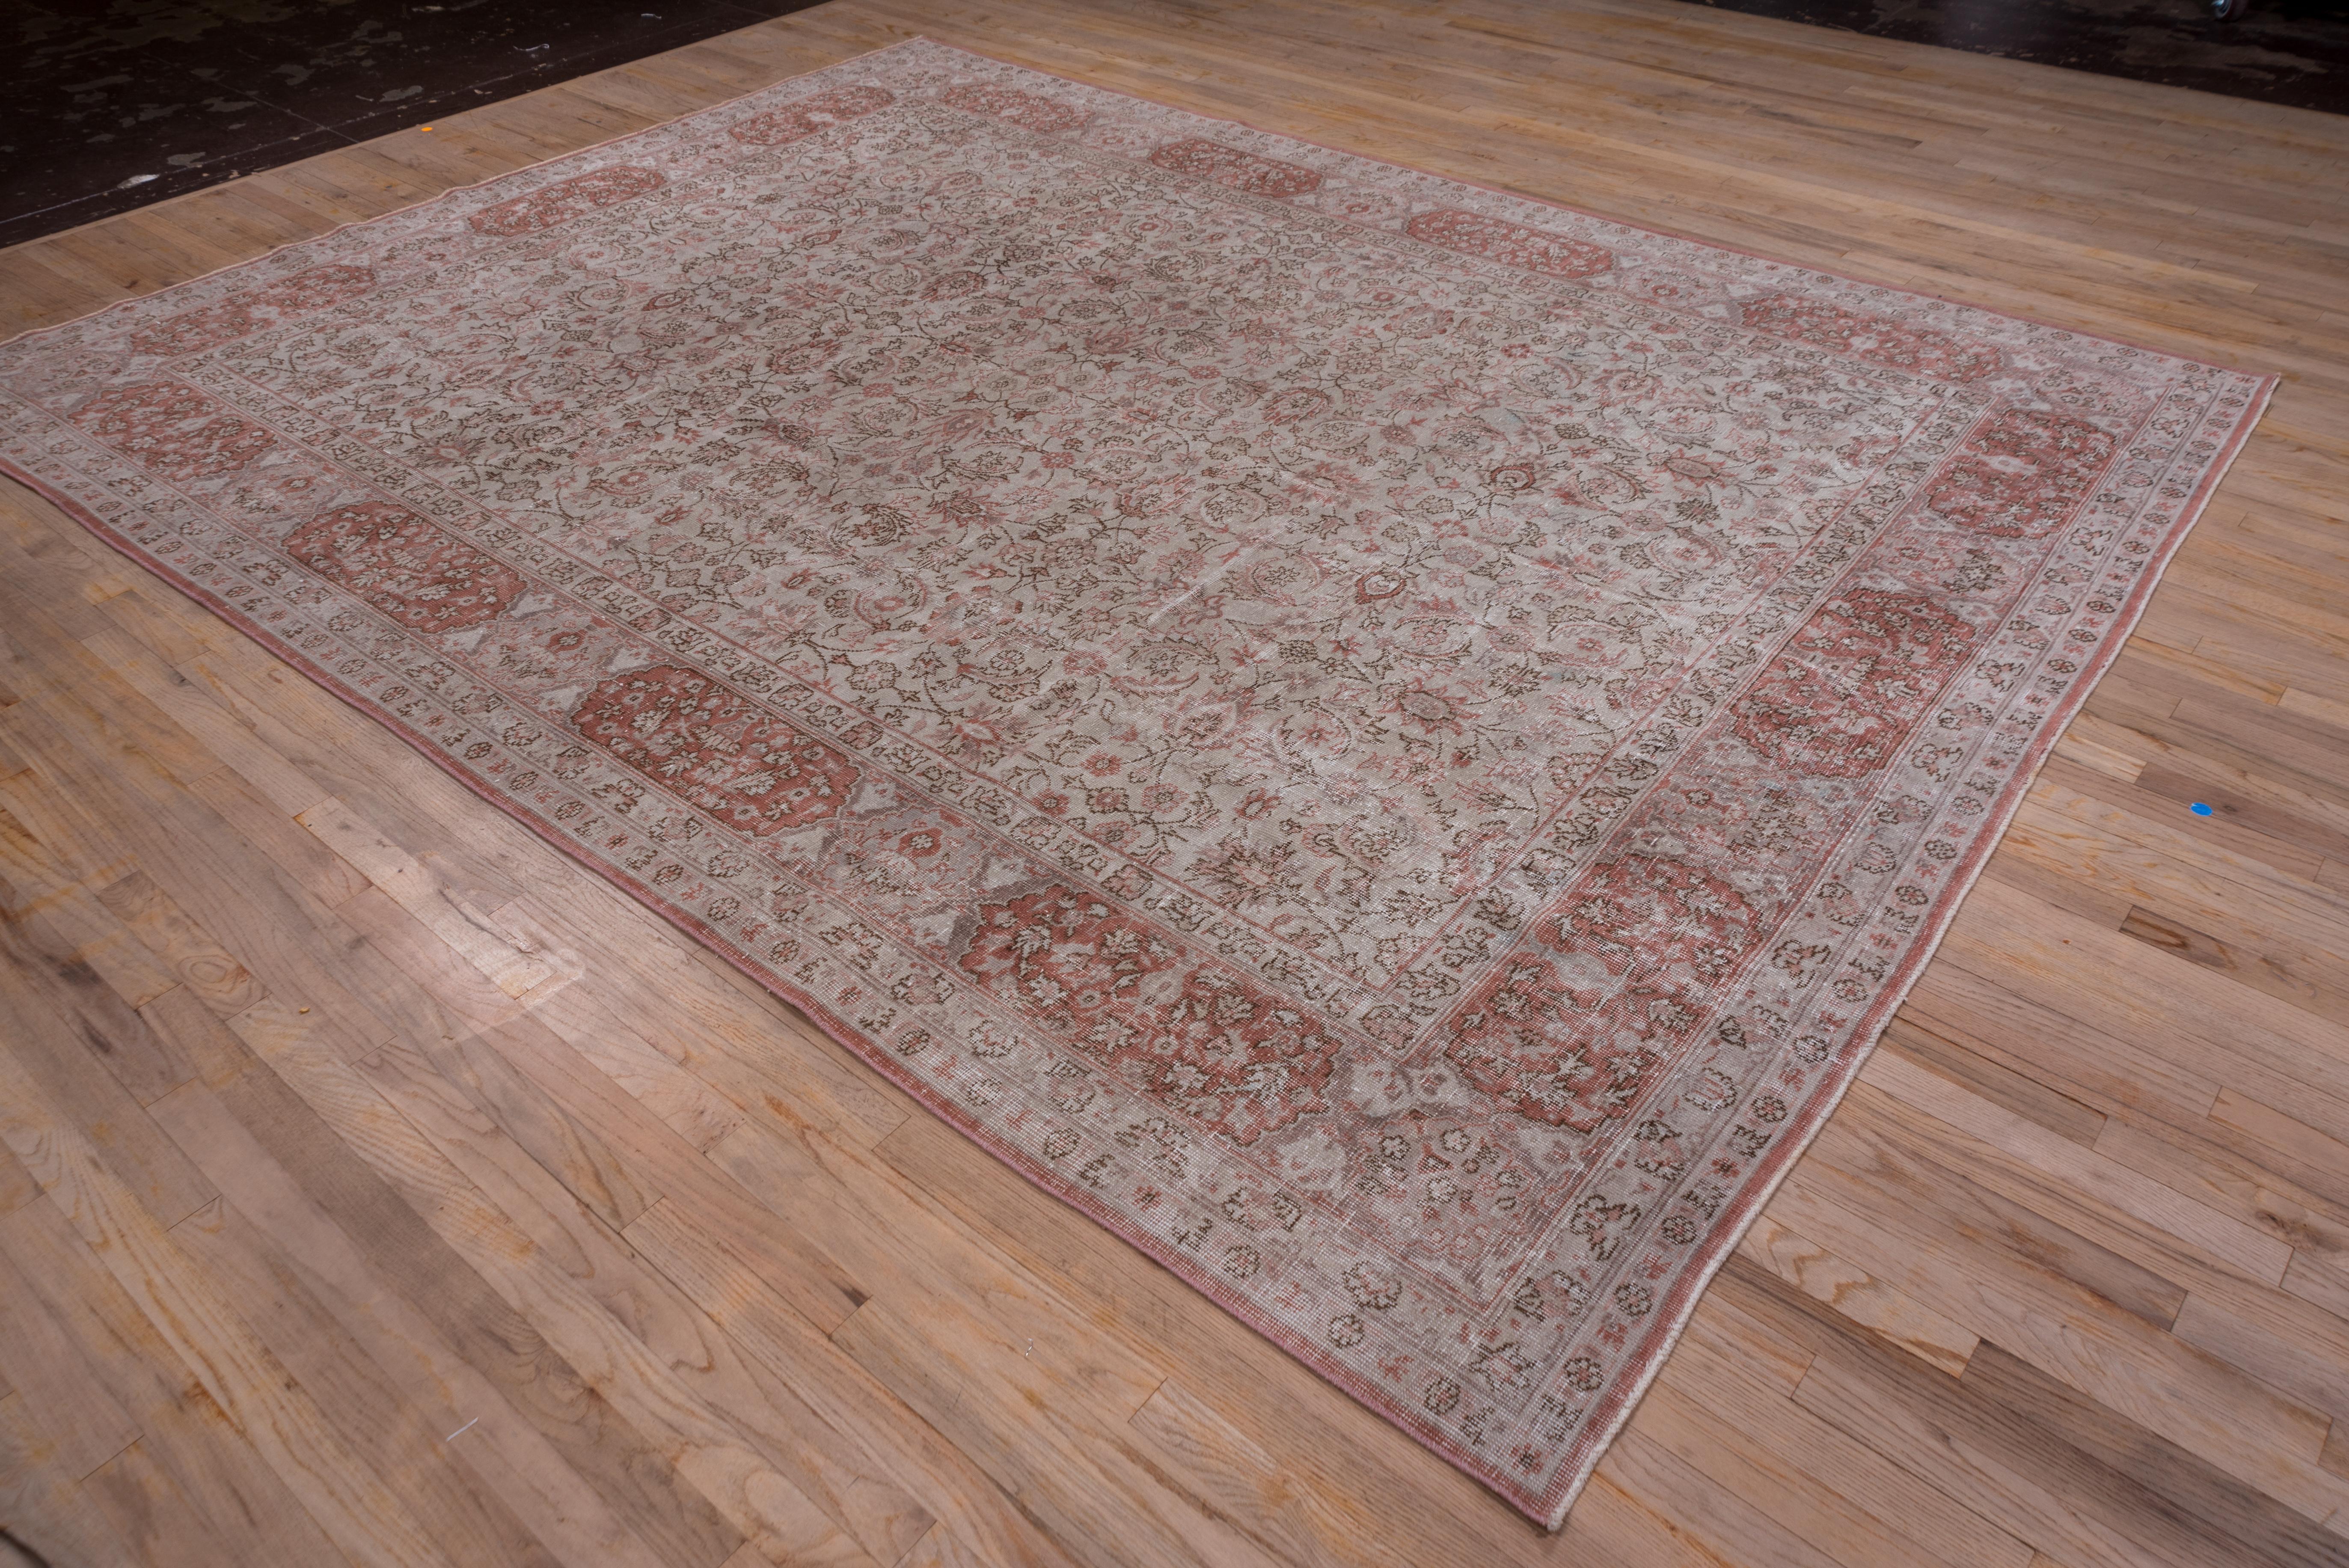 Hand-Knotted Antique Turkish Oushak Rug, Red Borders, Taupe Allover Field, circa 1940s For Sale